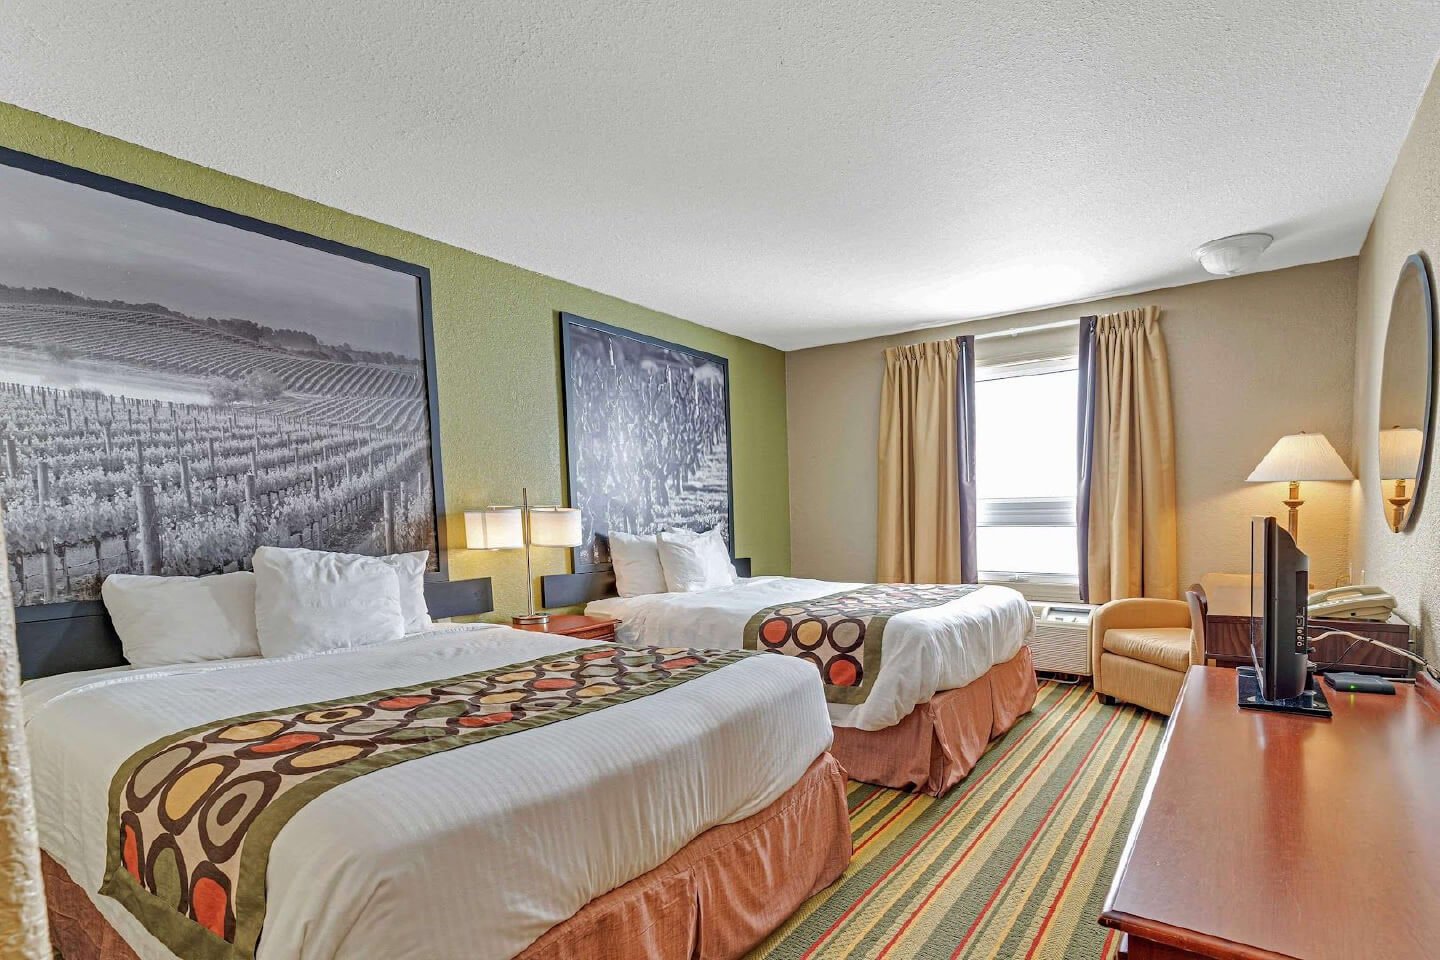 Example room at the pet-friendly Quality Inn and Choices Hotels - Grimsby, Ontario location